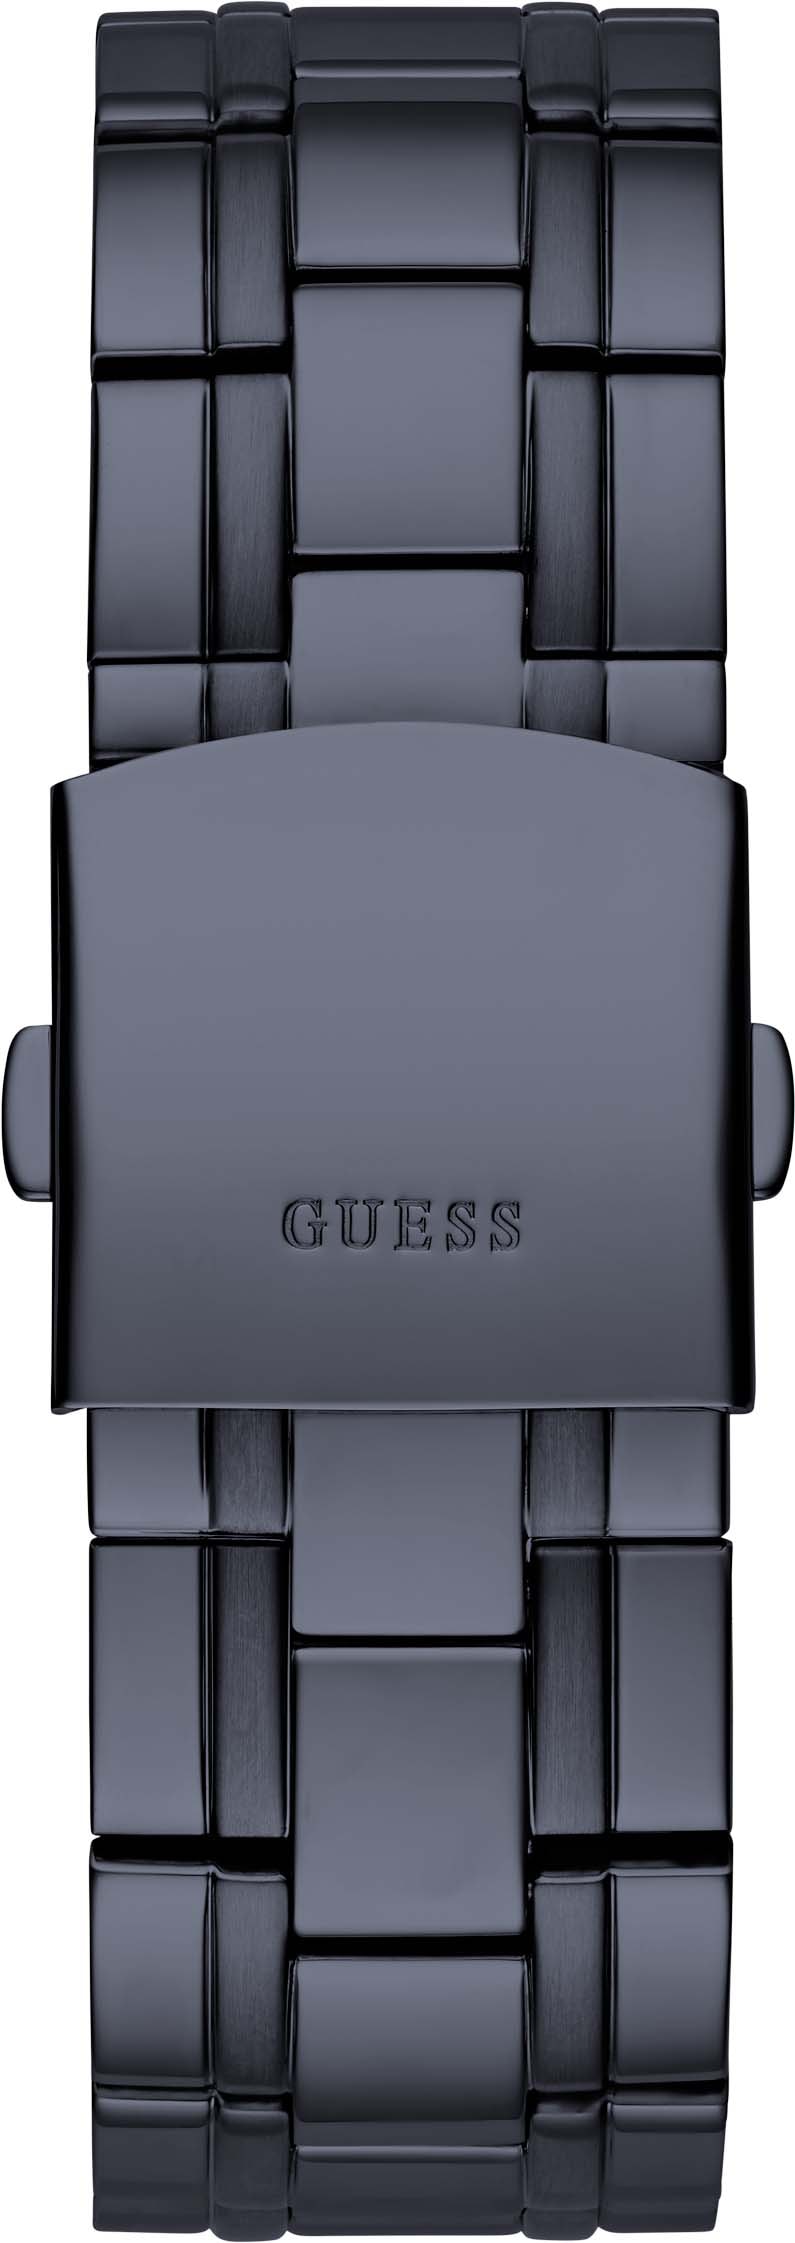 Multifunktionsuhr Guess »GW0490G4«